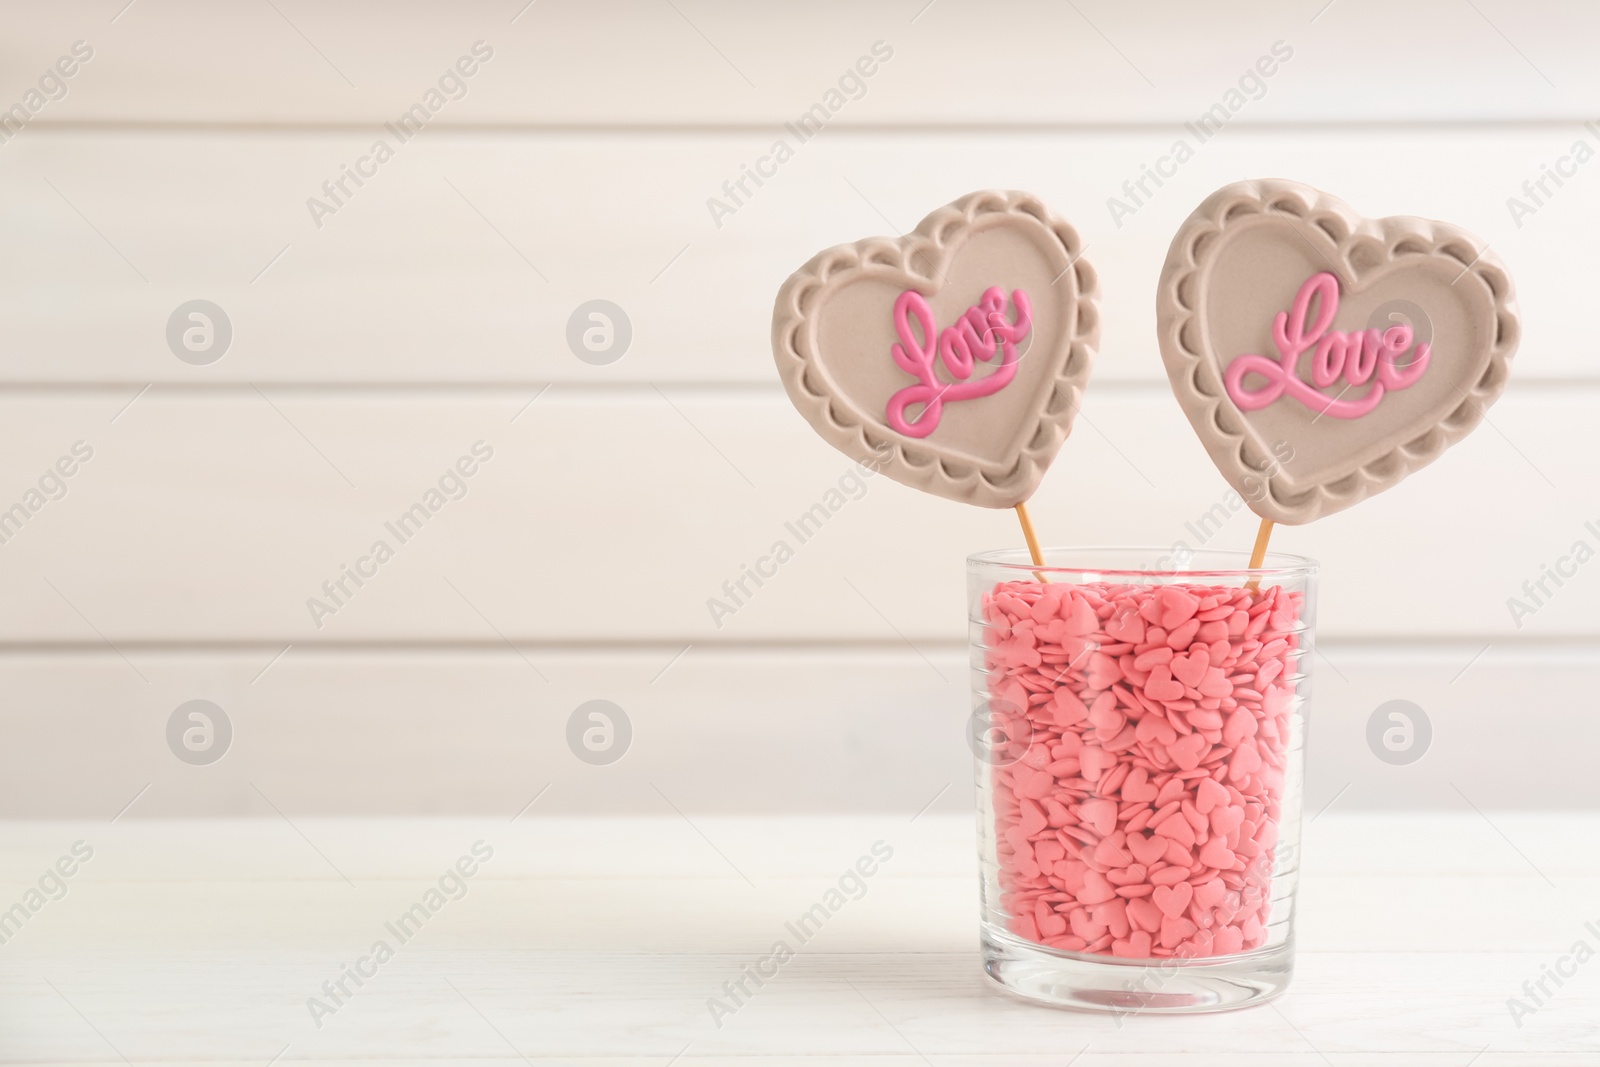 Photo of Heart shaped lollipops made of chocolate with sprinkles in cup on white table, space for text